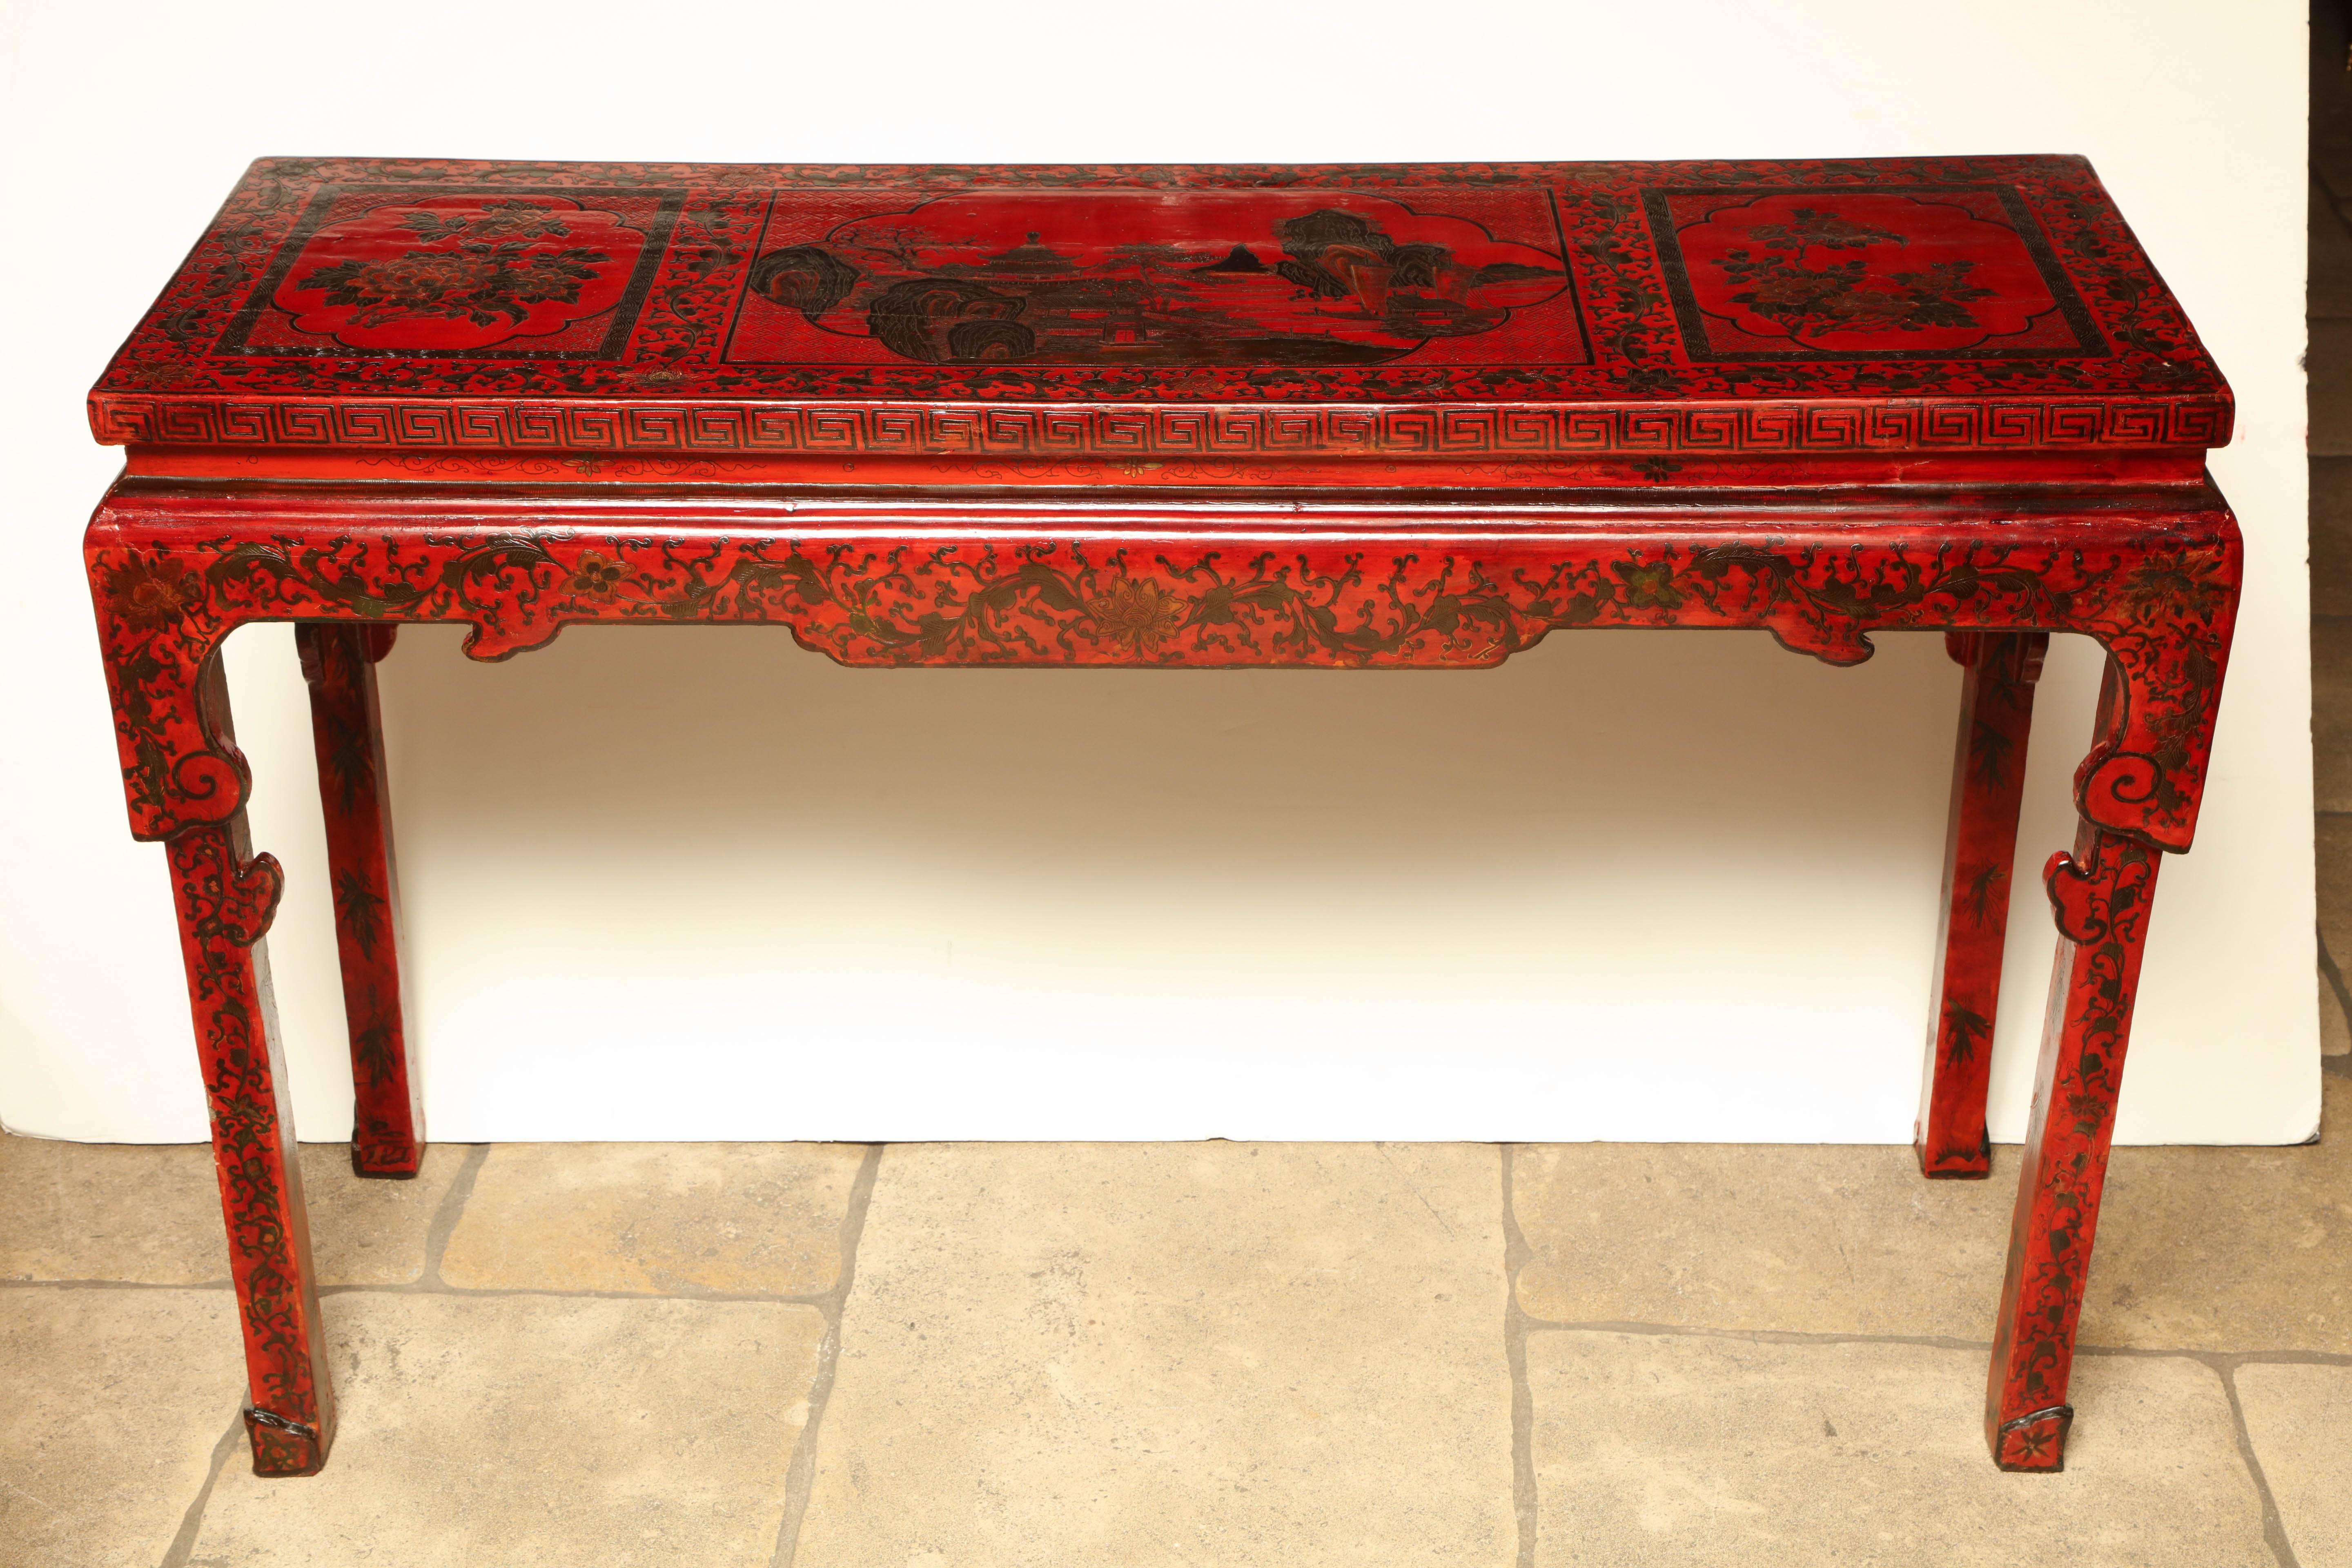 Chinese red lacquered chinoiserie decorated alter table.